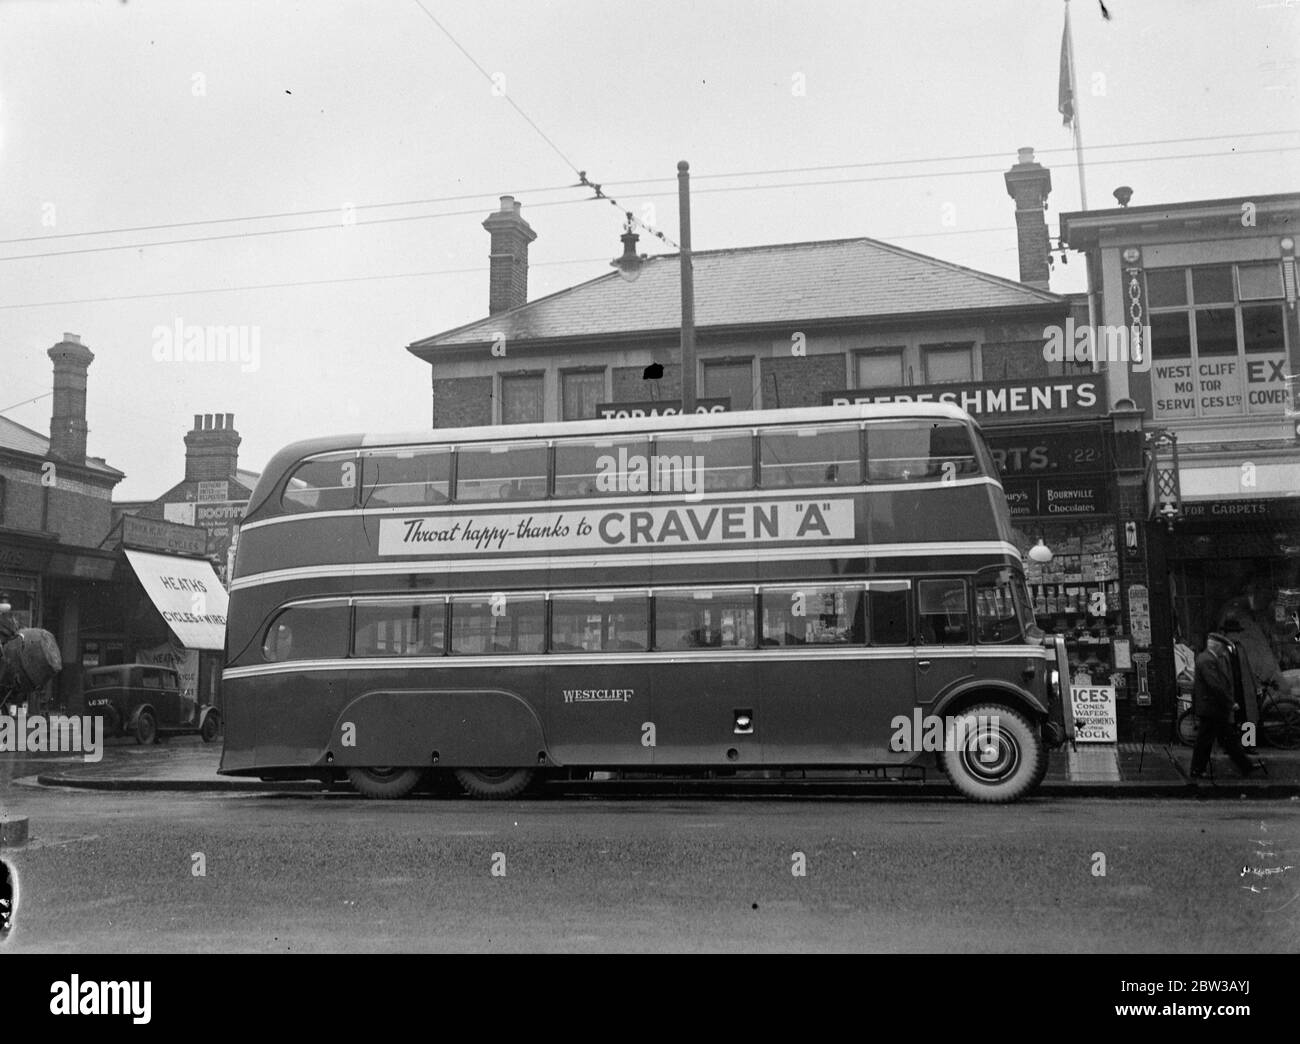 The largest , longest and lowest bus in the British Isles . Picture shows the bus featuring a Craven cigarette advertisement on its side parked outside shops in Westcliff October 1934 Stock Photo